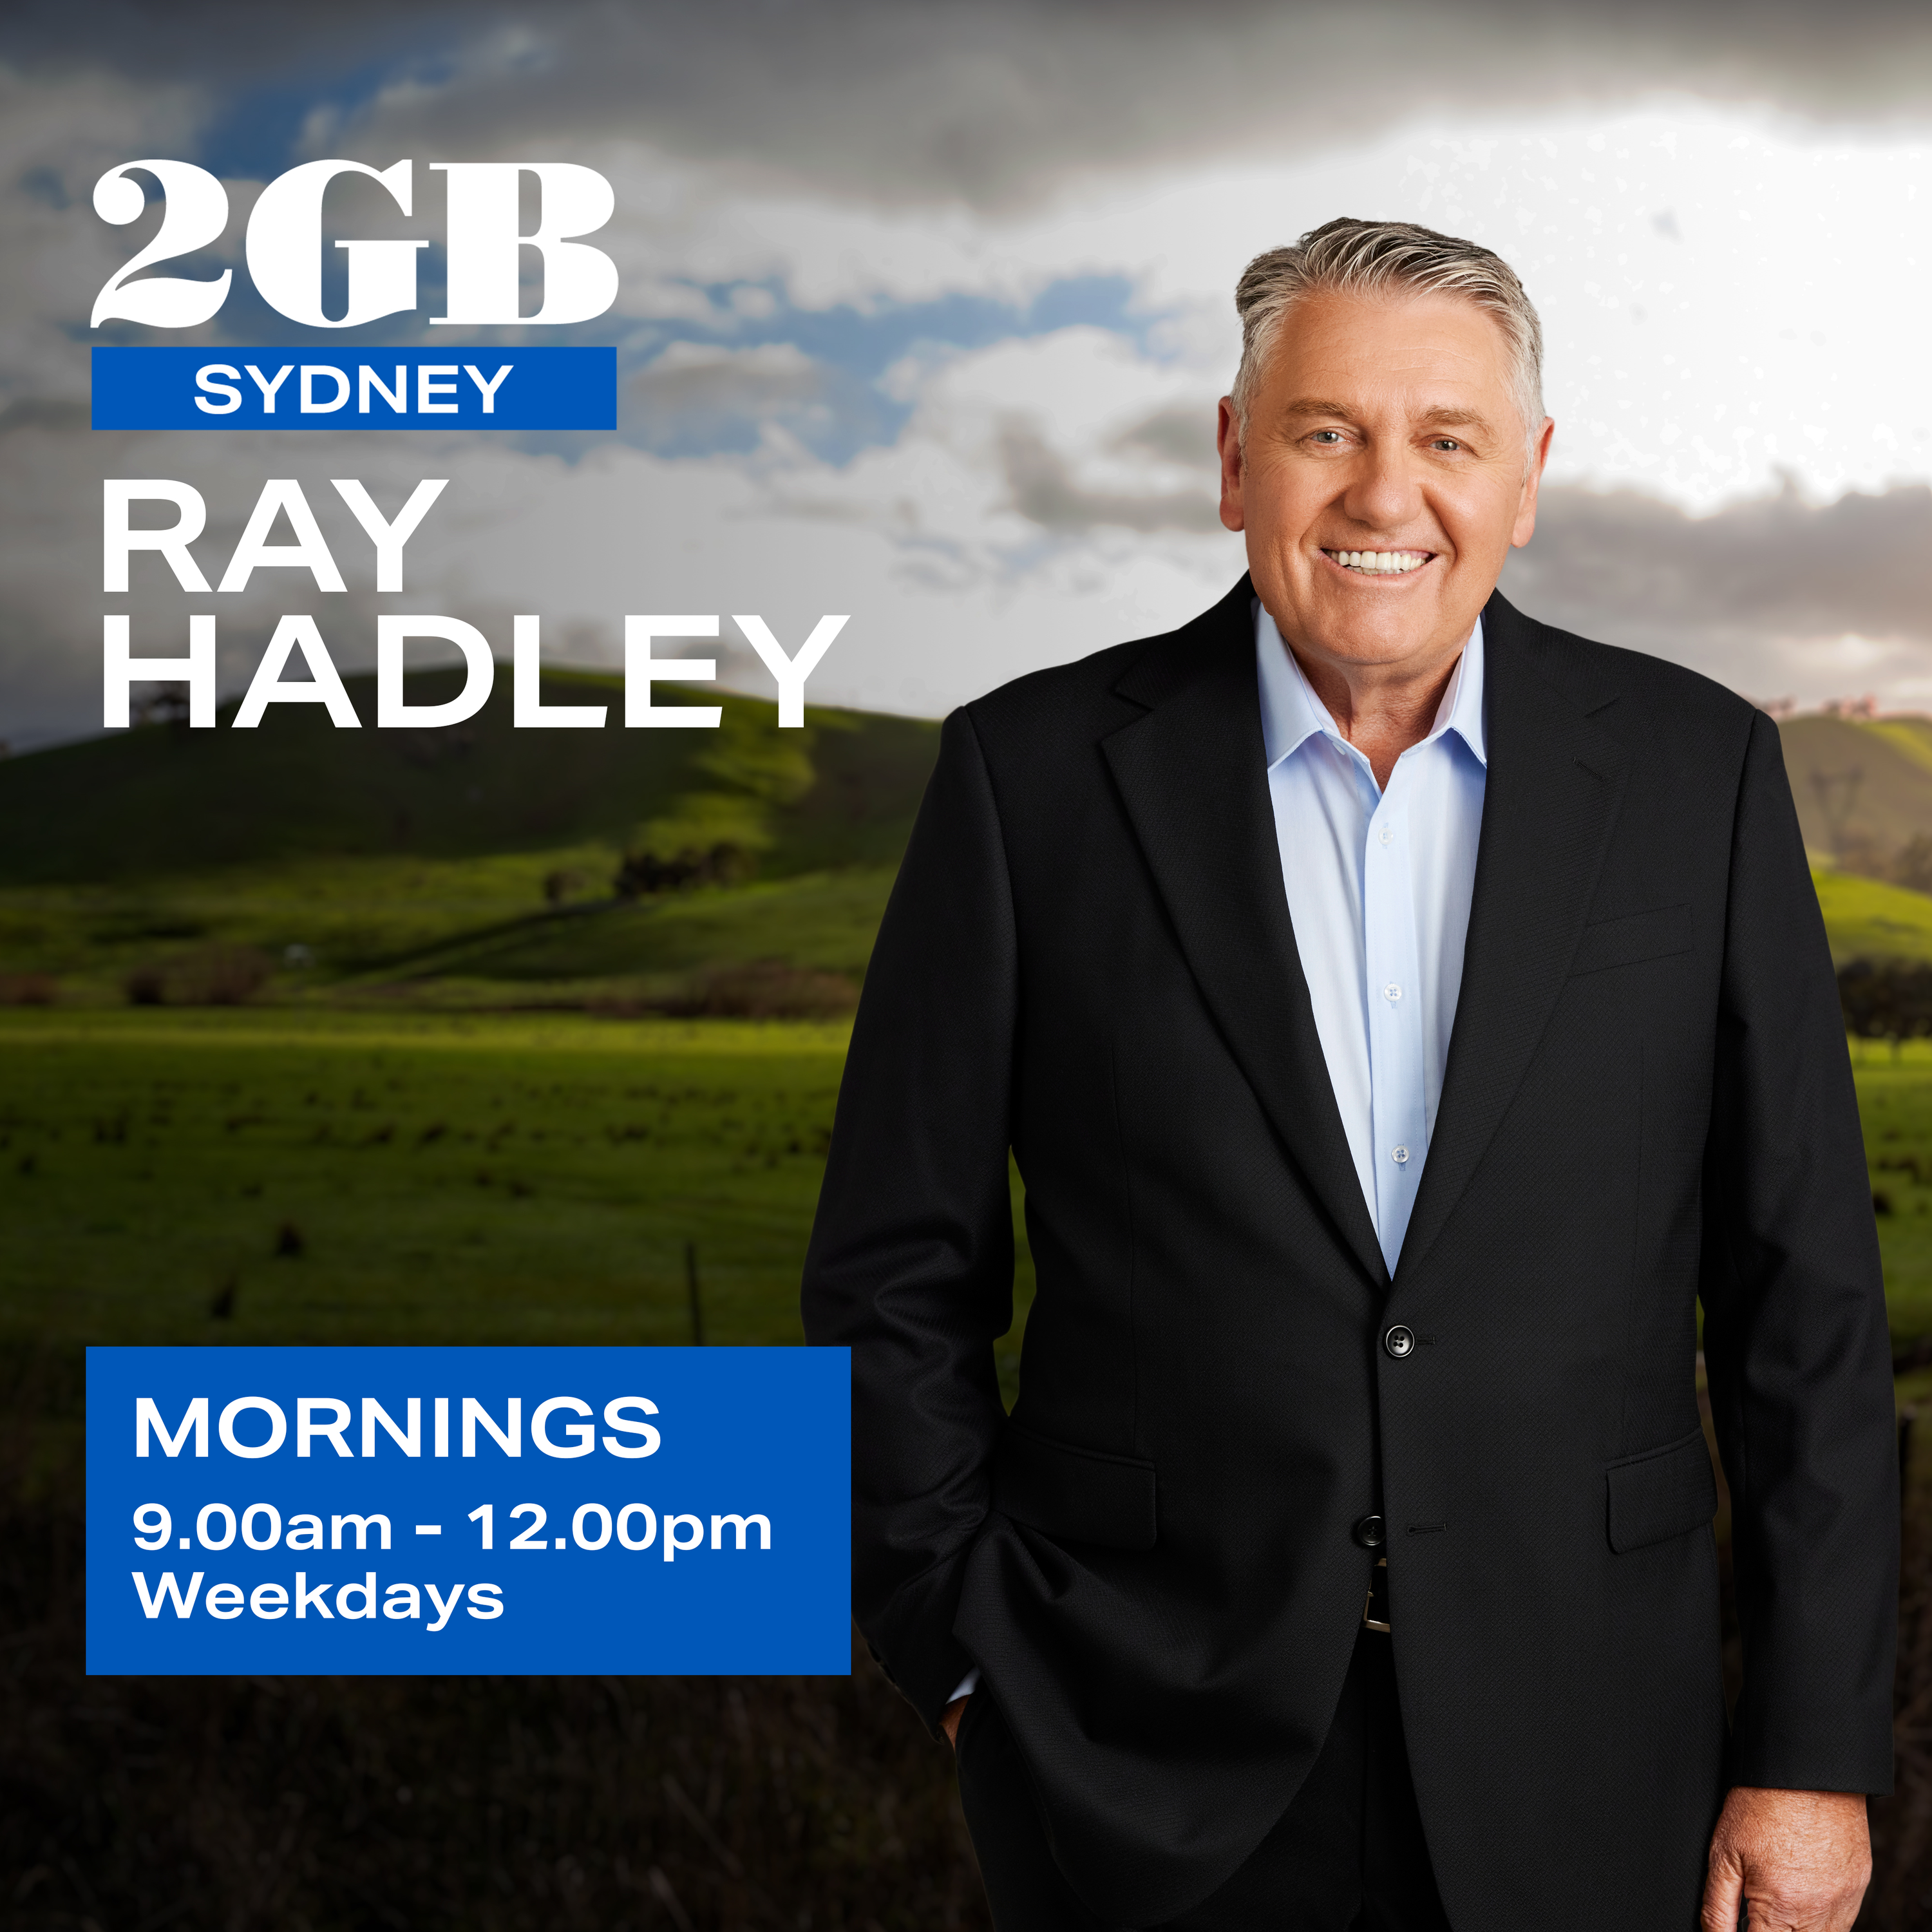 The Ray Hadley Morning Show with Mark Levy - Full Show, January 4th